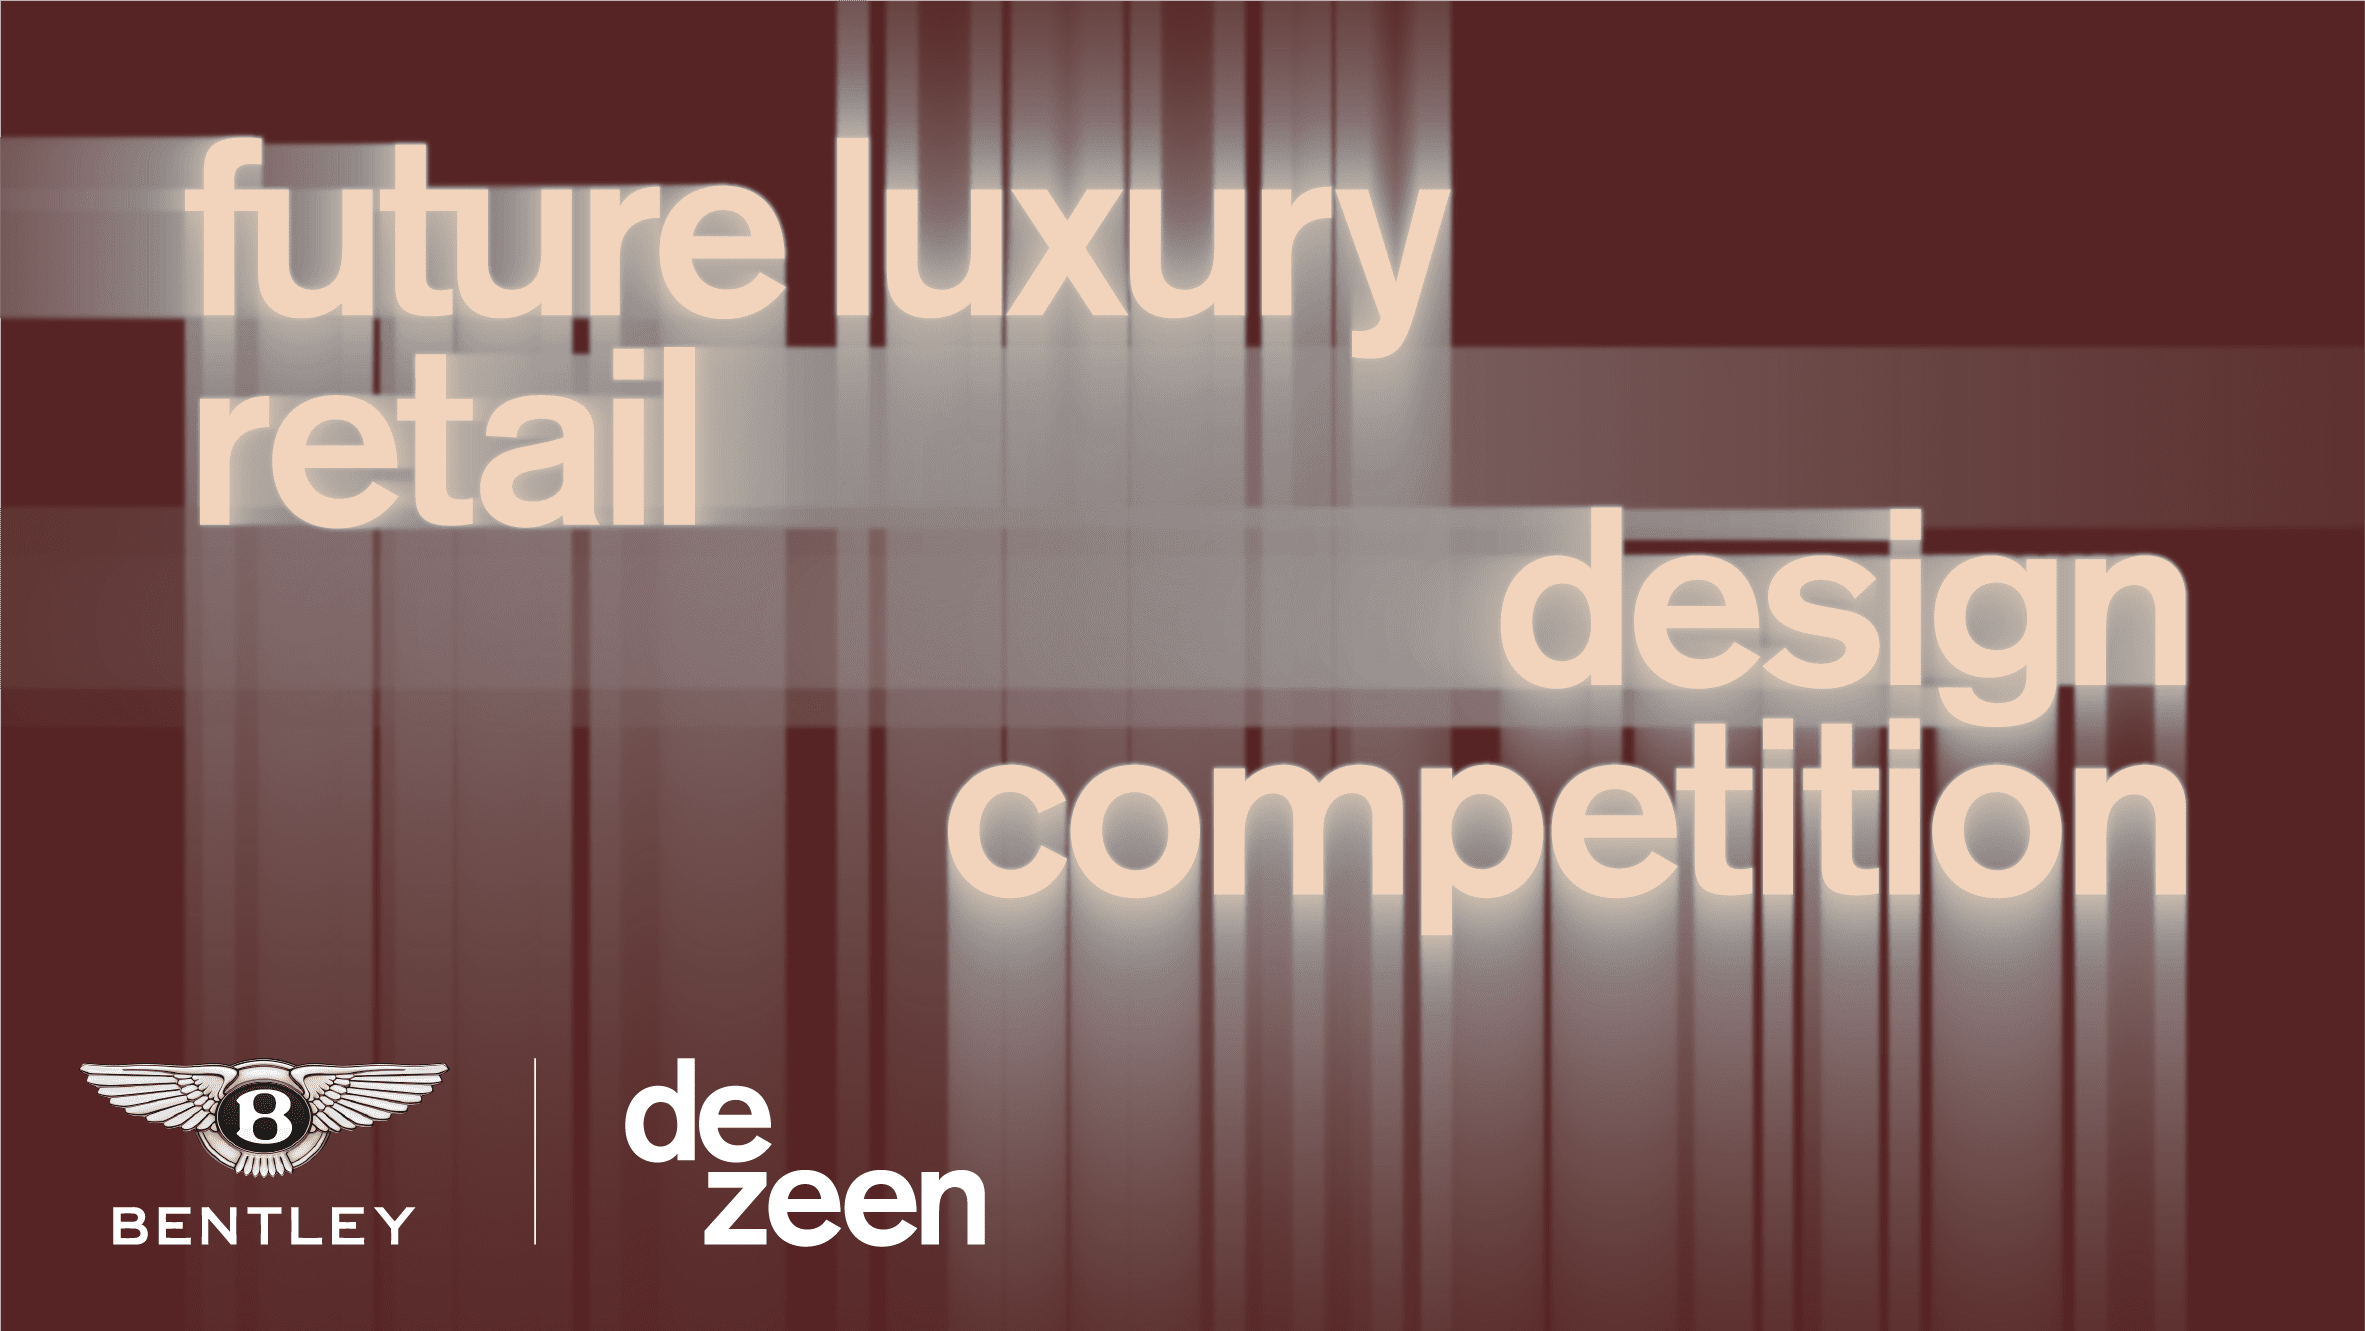 One month left to enter Future Luxury Retail Design Competition